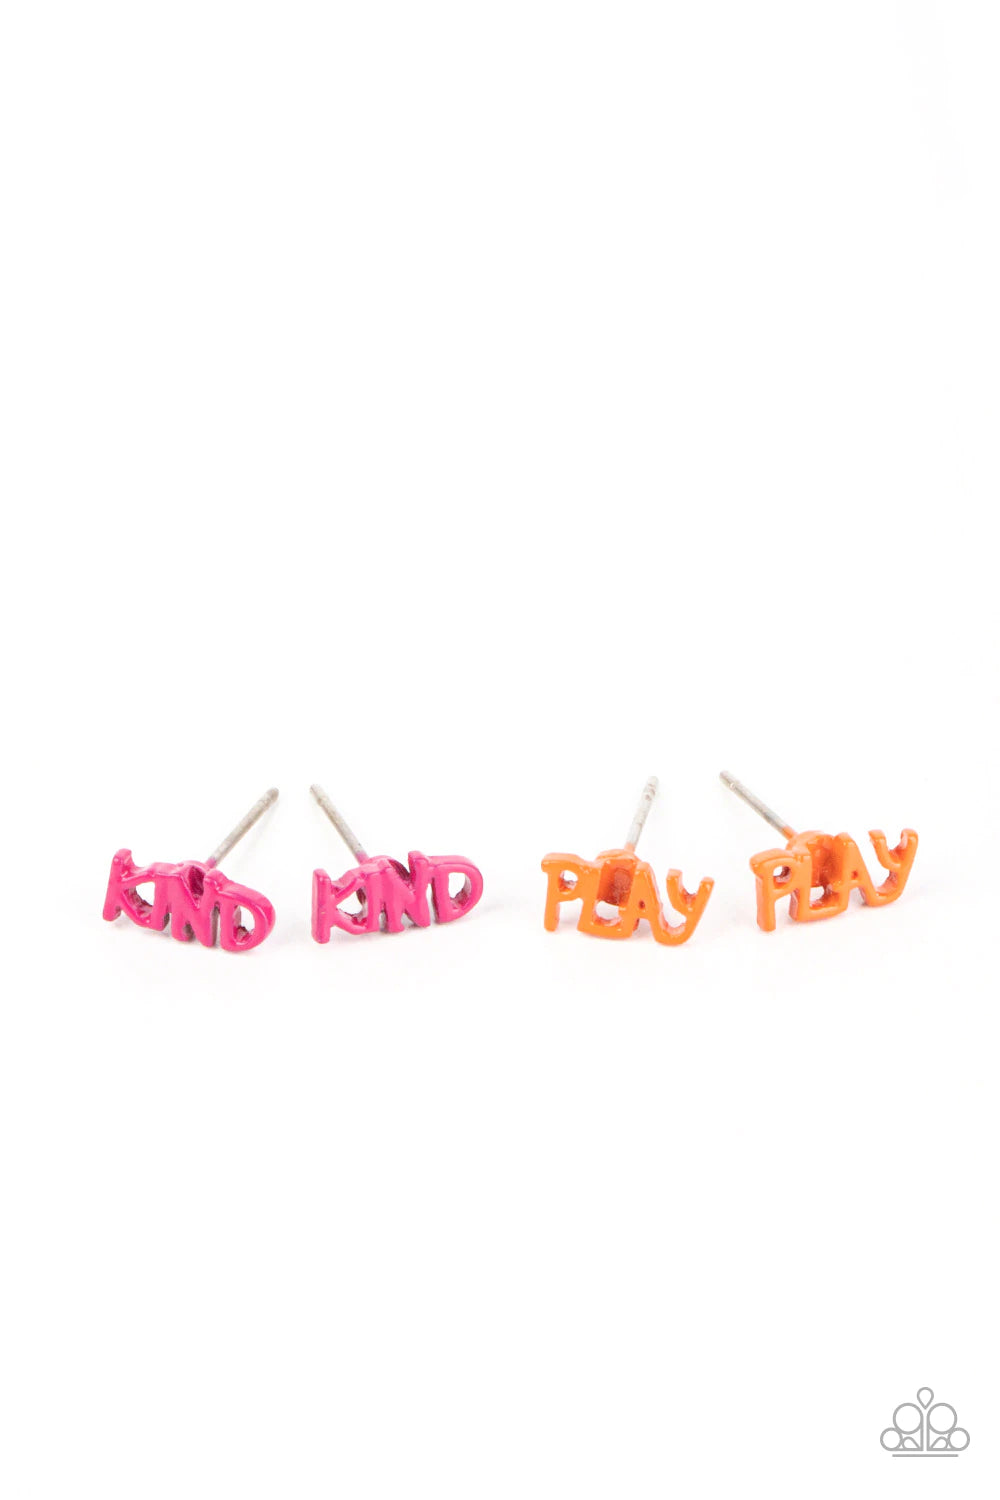 Paparazzi Accessories Starlet Shimmer Earrings #23 The multicolored inspirational frames include a pink "Hope," a pink "Kind," a blue "Soar," a green "Leap," an orange "Play," a purple "Make," a yellow "Care," a red "Love," a white "Wish," and a purple "G